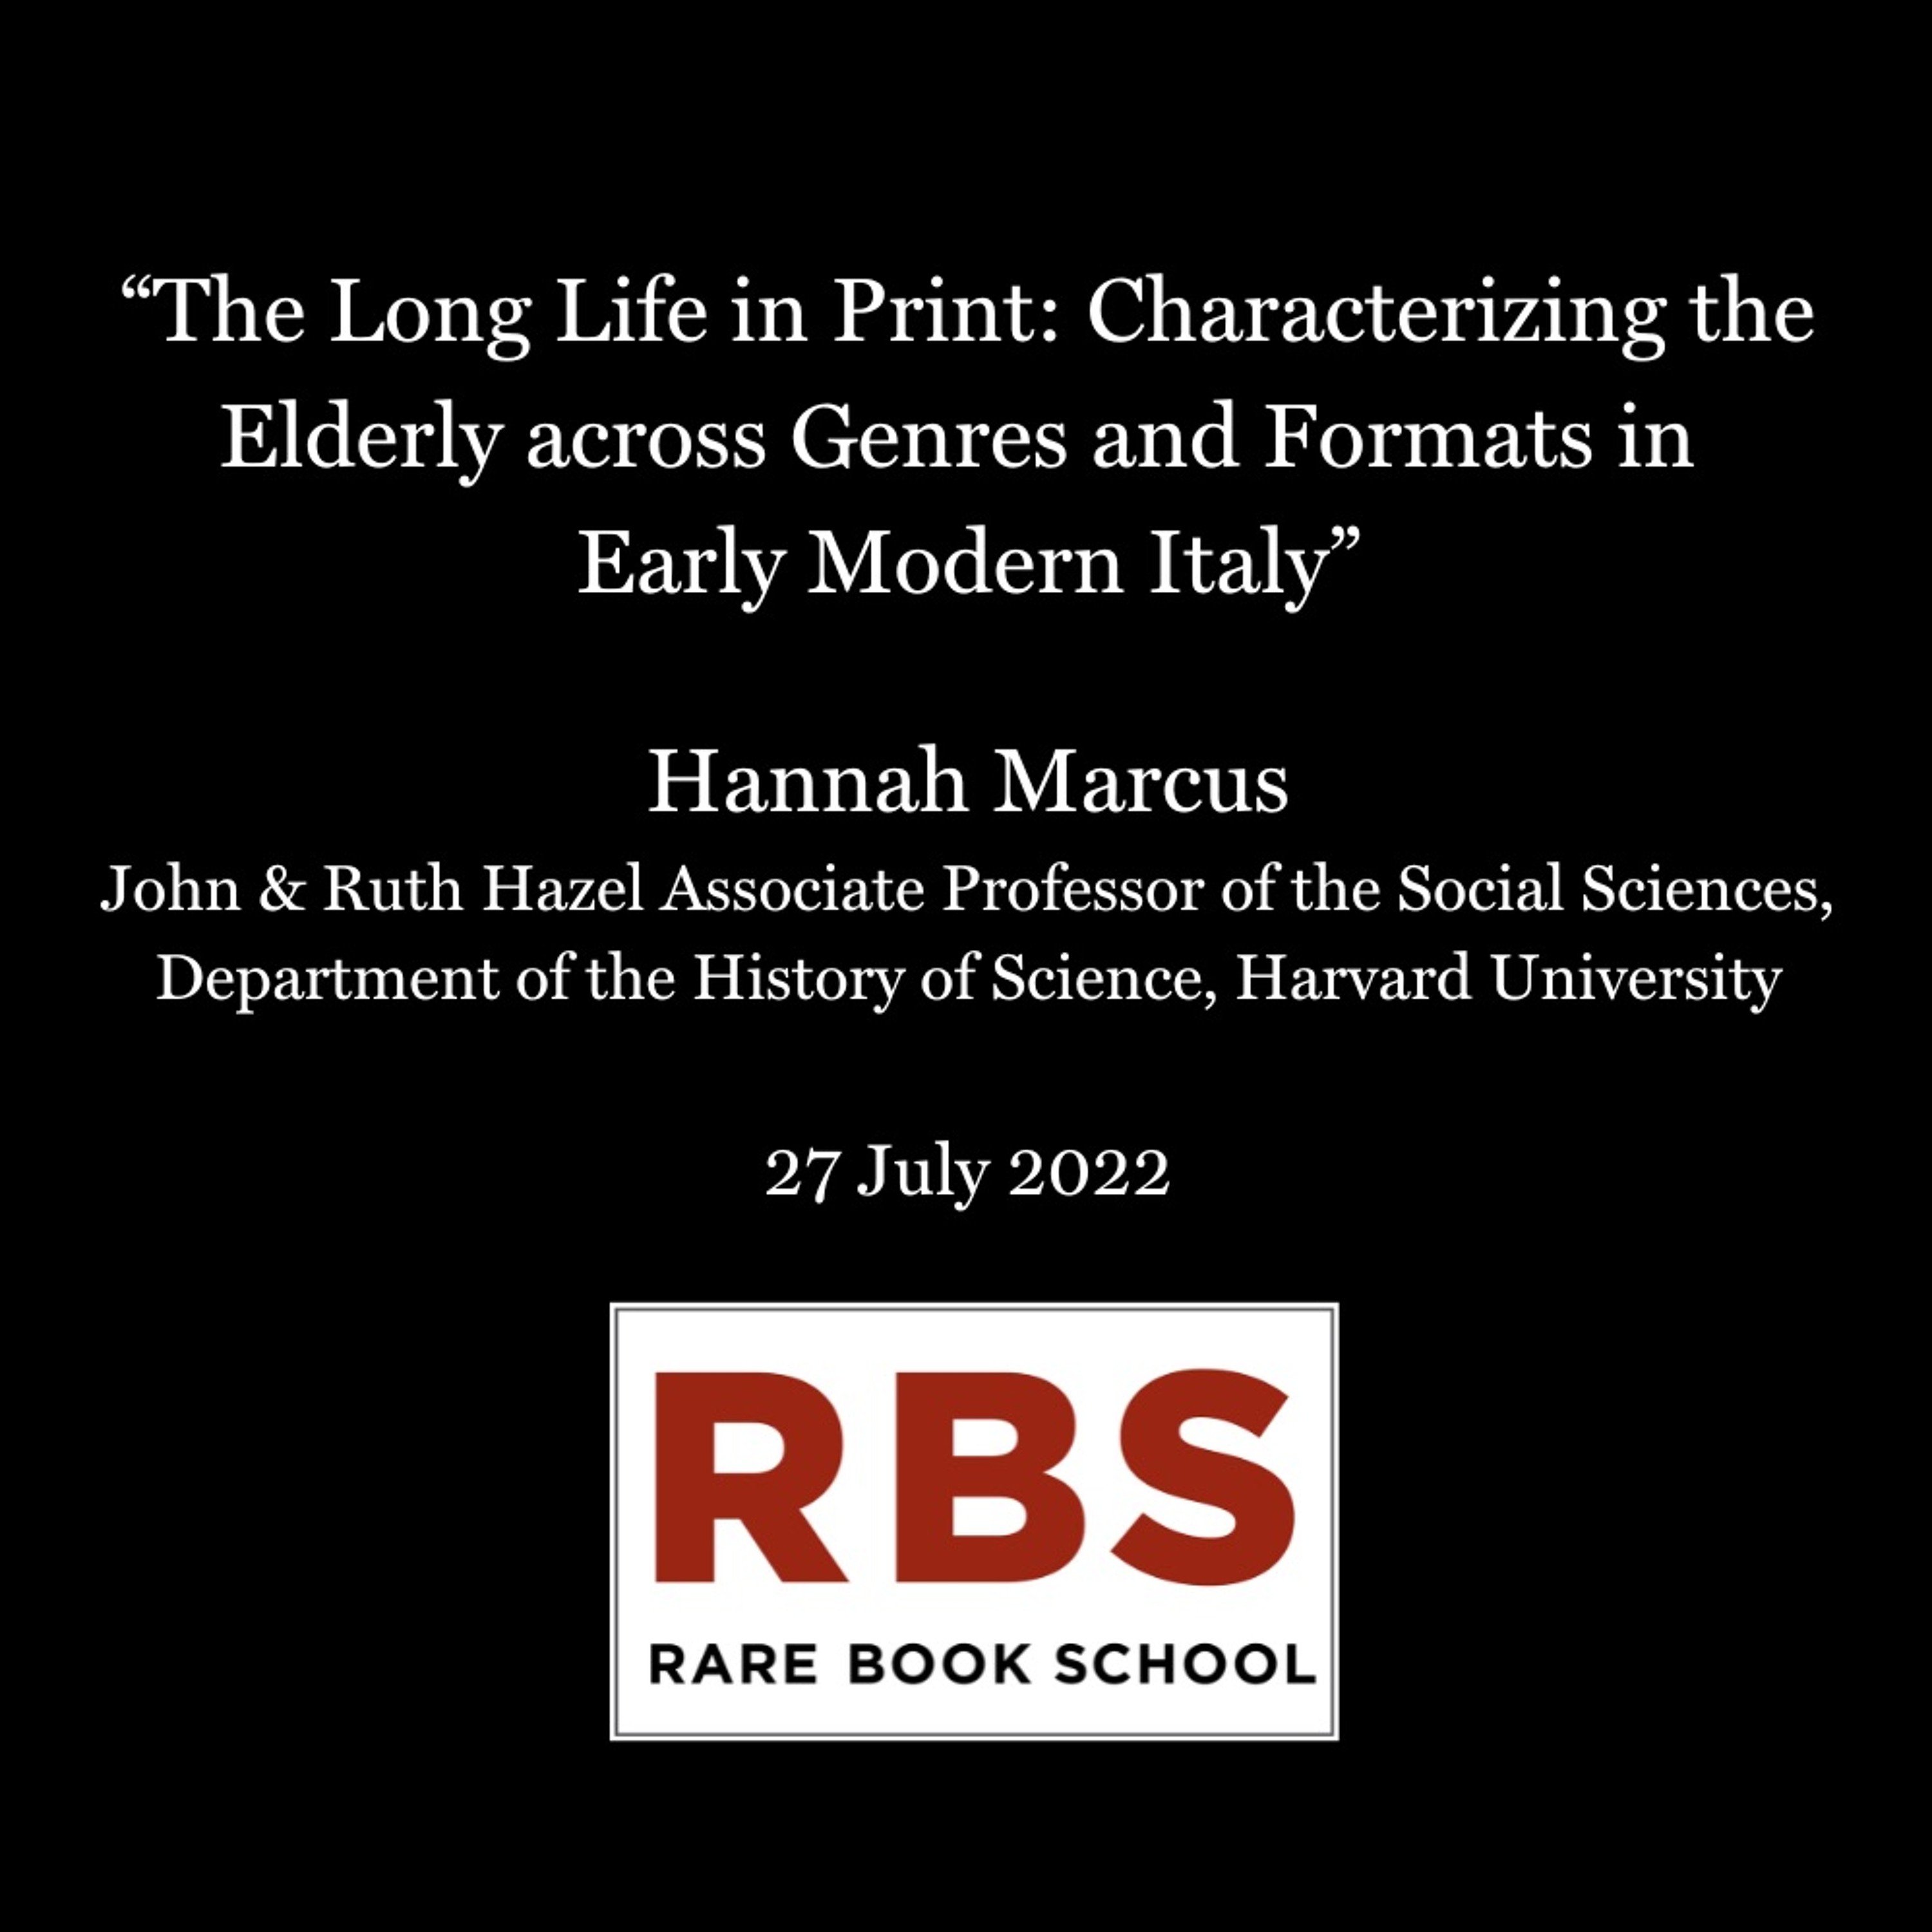 Marcus, Hannah - ”Characterizing the  Elderly across Formats in Early Modern Italy” - 27 July 2022